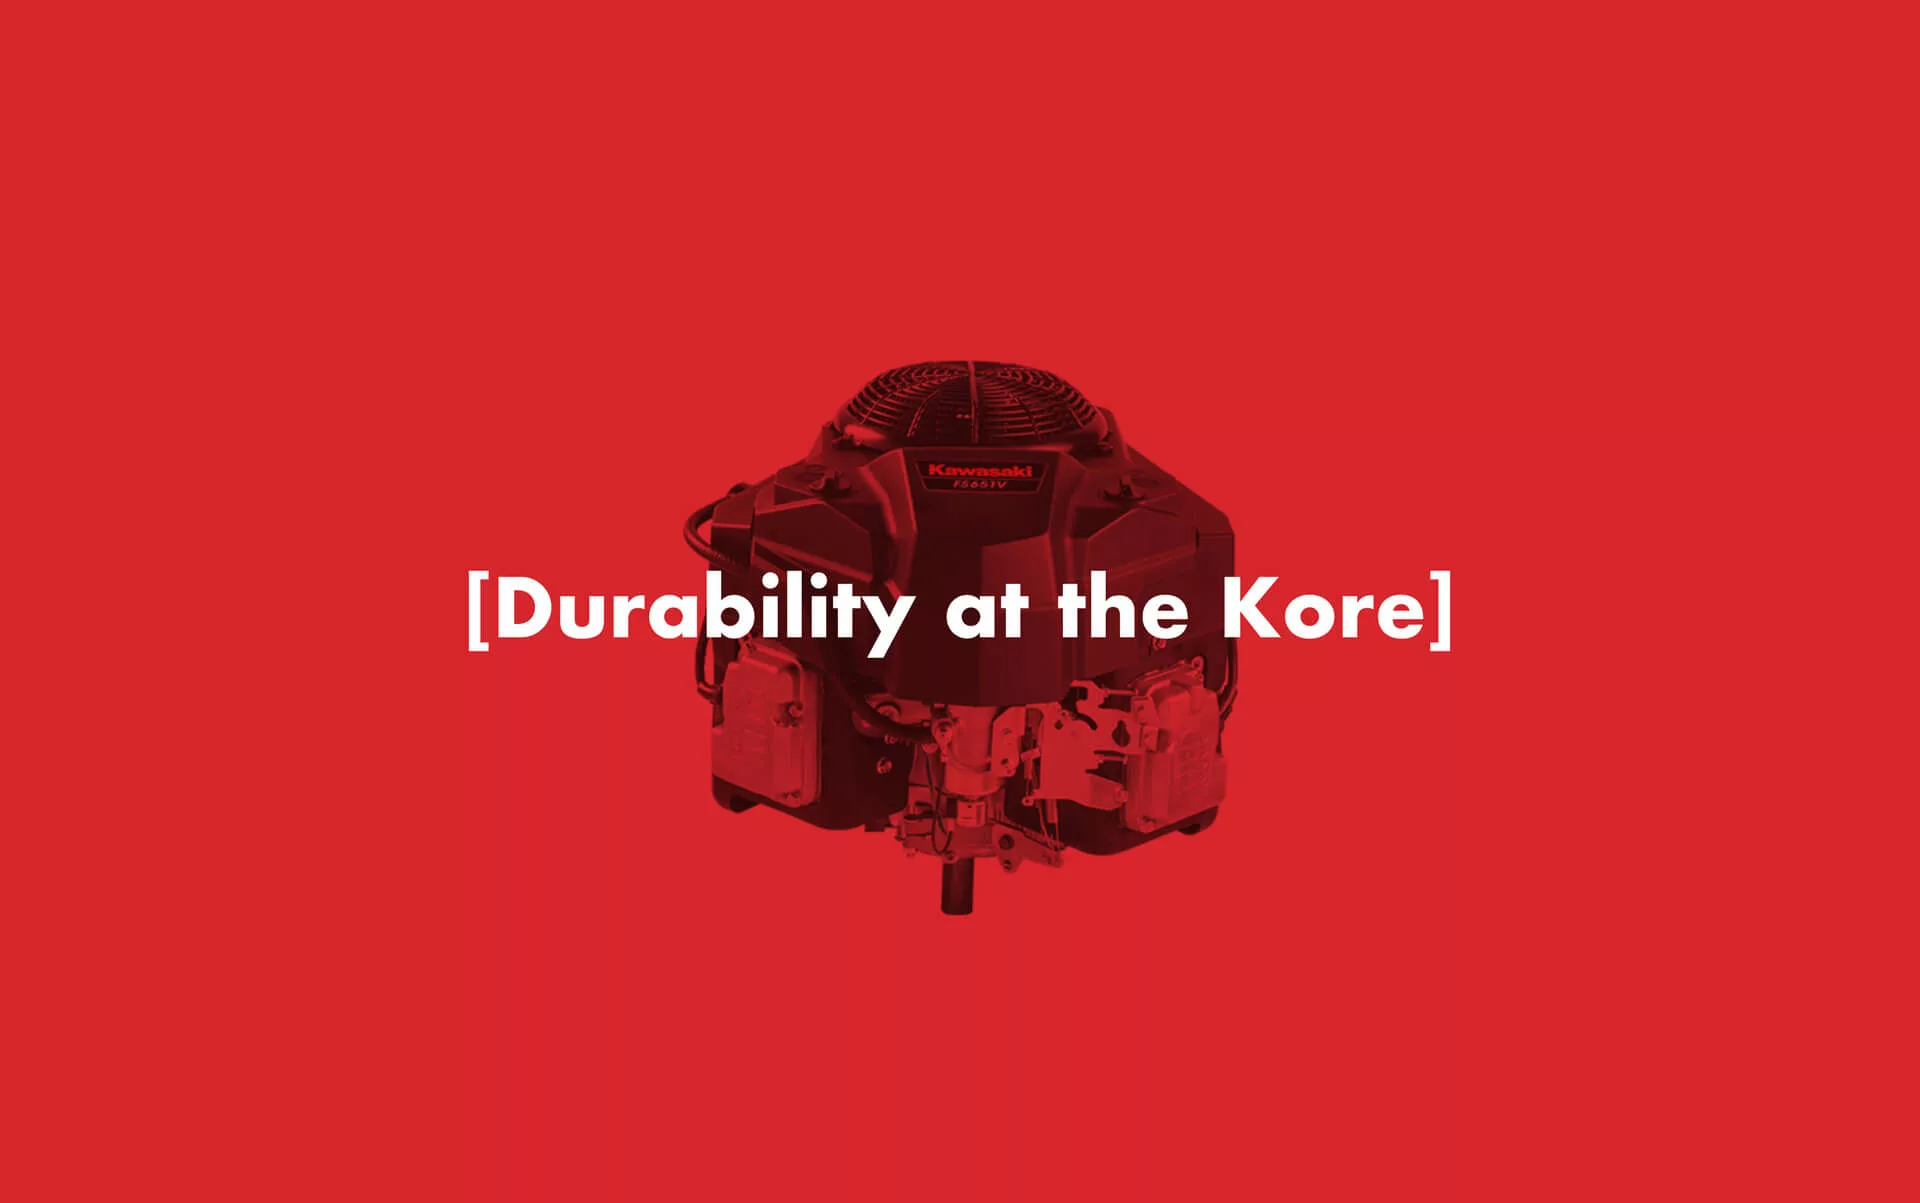 A Kawasaki engine displayed on a red background with text from the campaign over the top